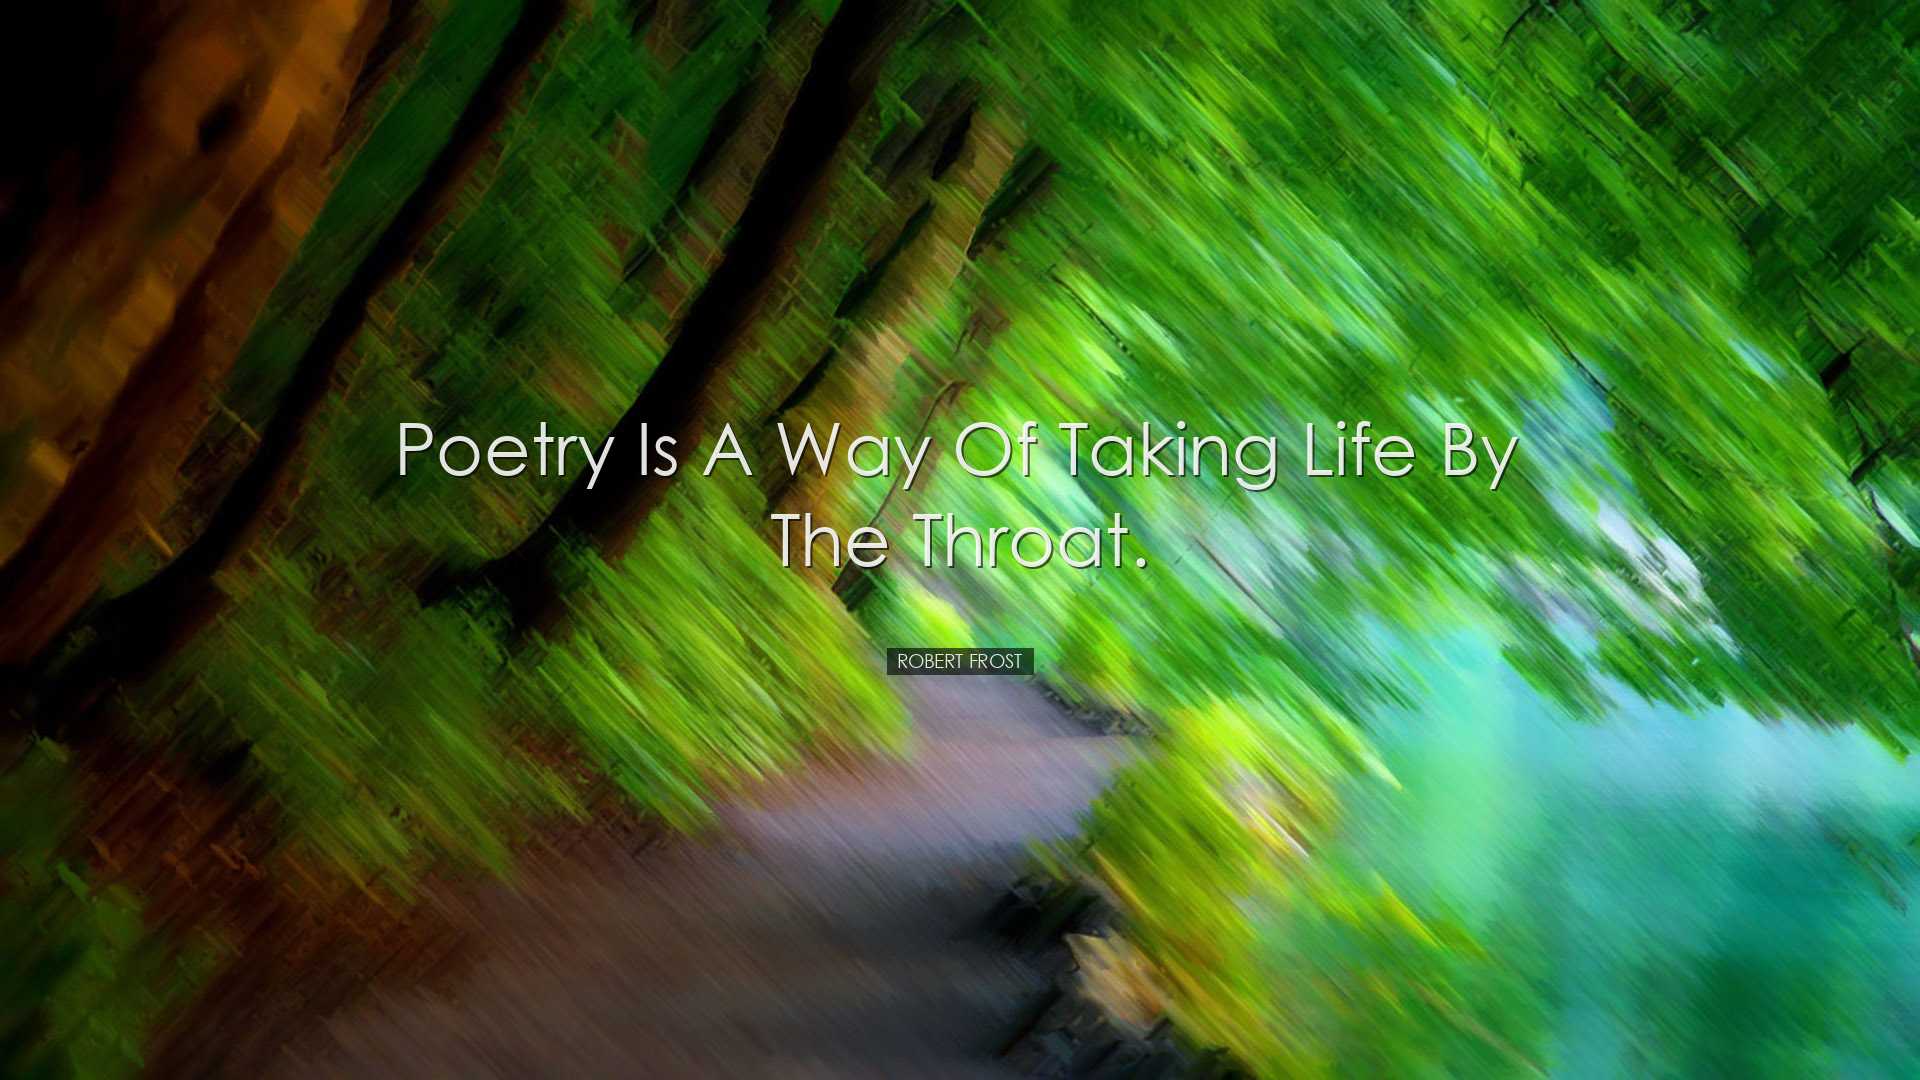 Poetry is a way of taking life by the throat. - Robert Frost